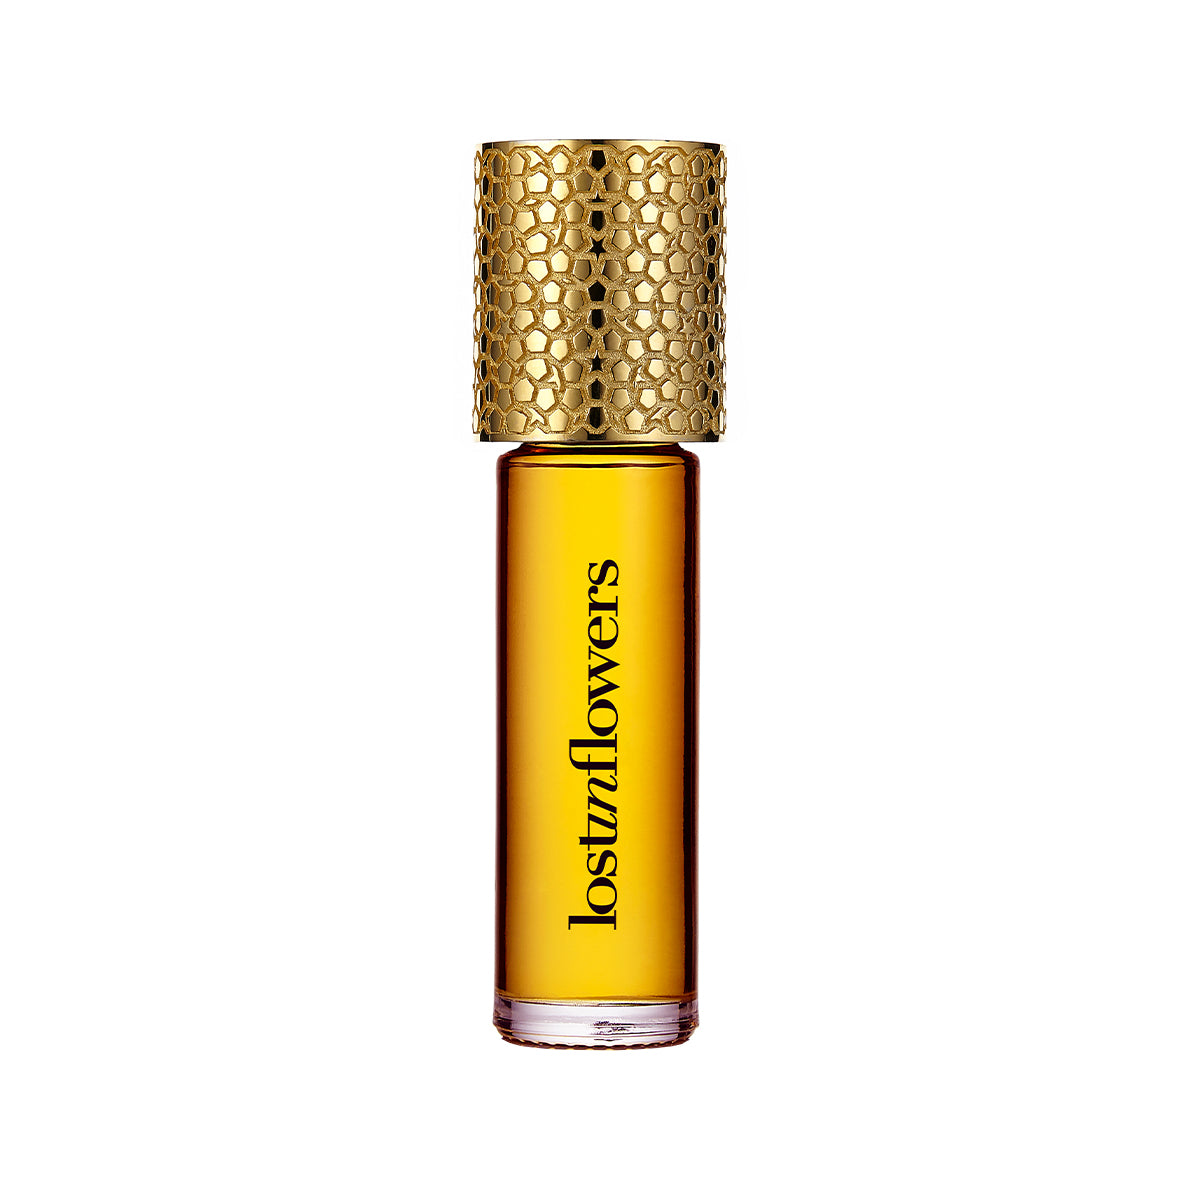 Lost in Flowers (Roll-on) - Strangelove NYC - Aceite de perfume 10ml